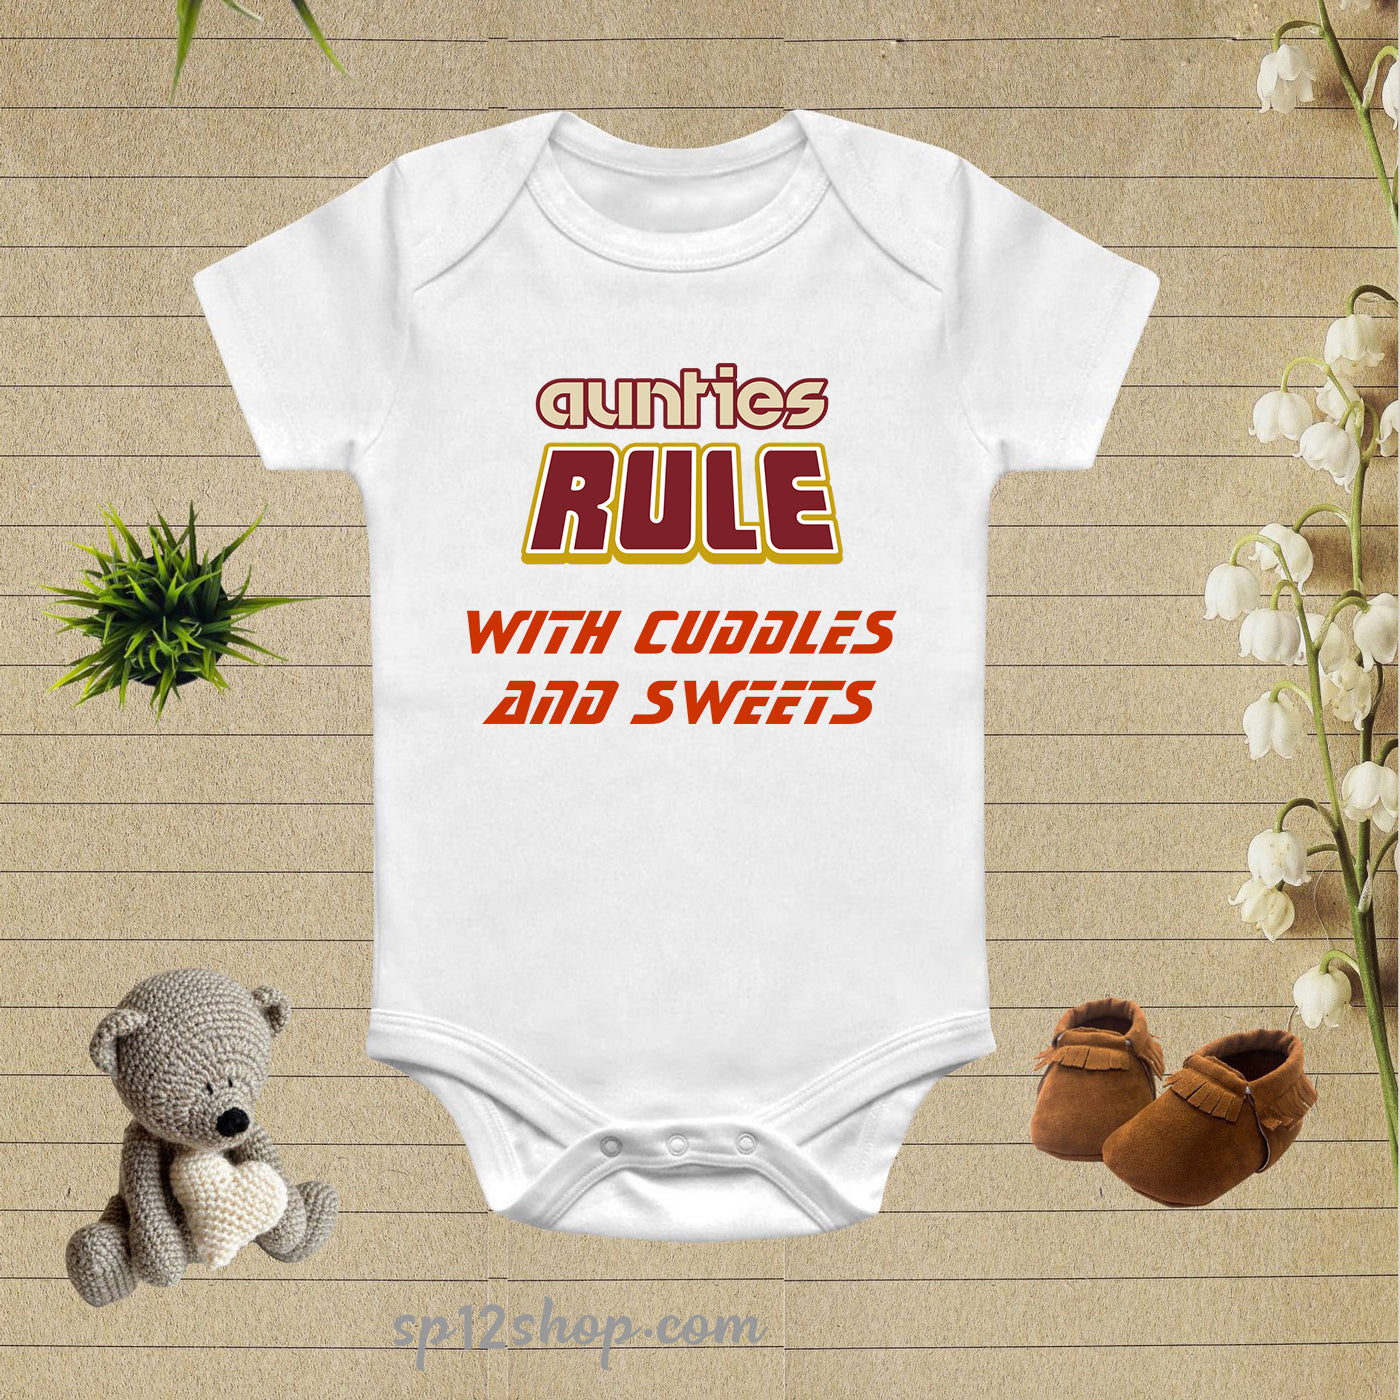 Aunties Rule With Cuddles And Sweets Baby Bodysuit Onesie